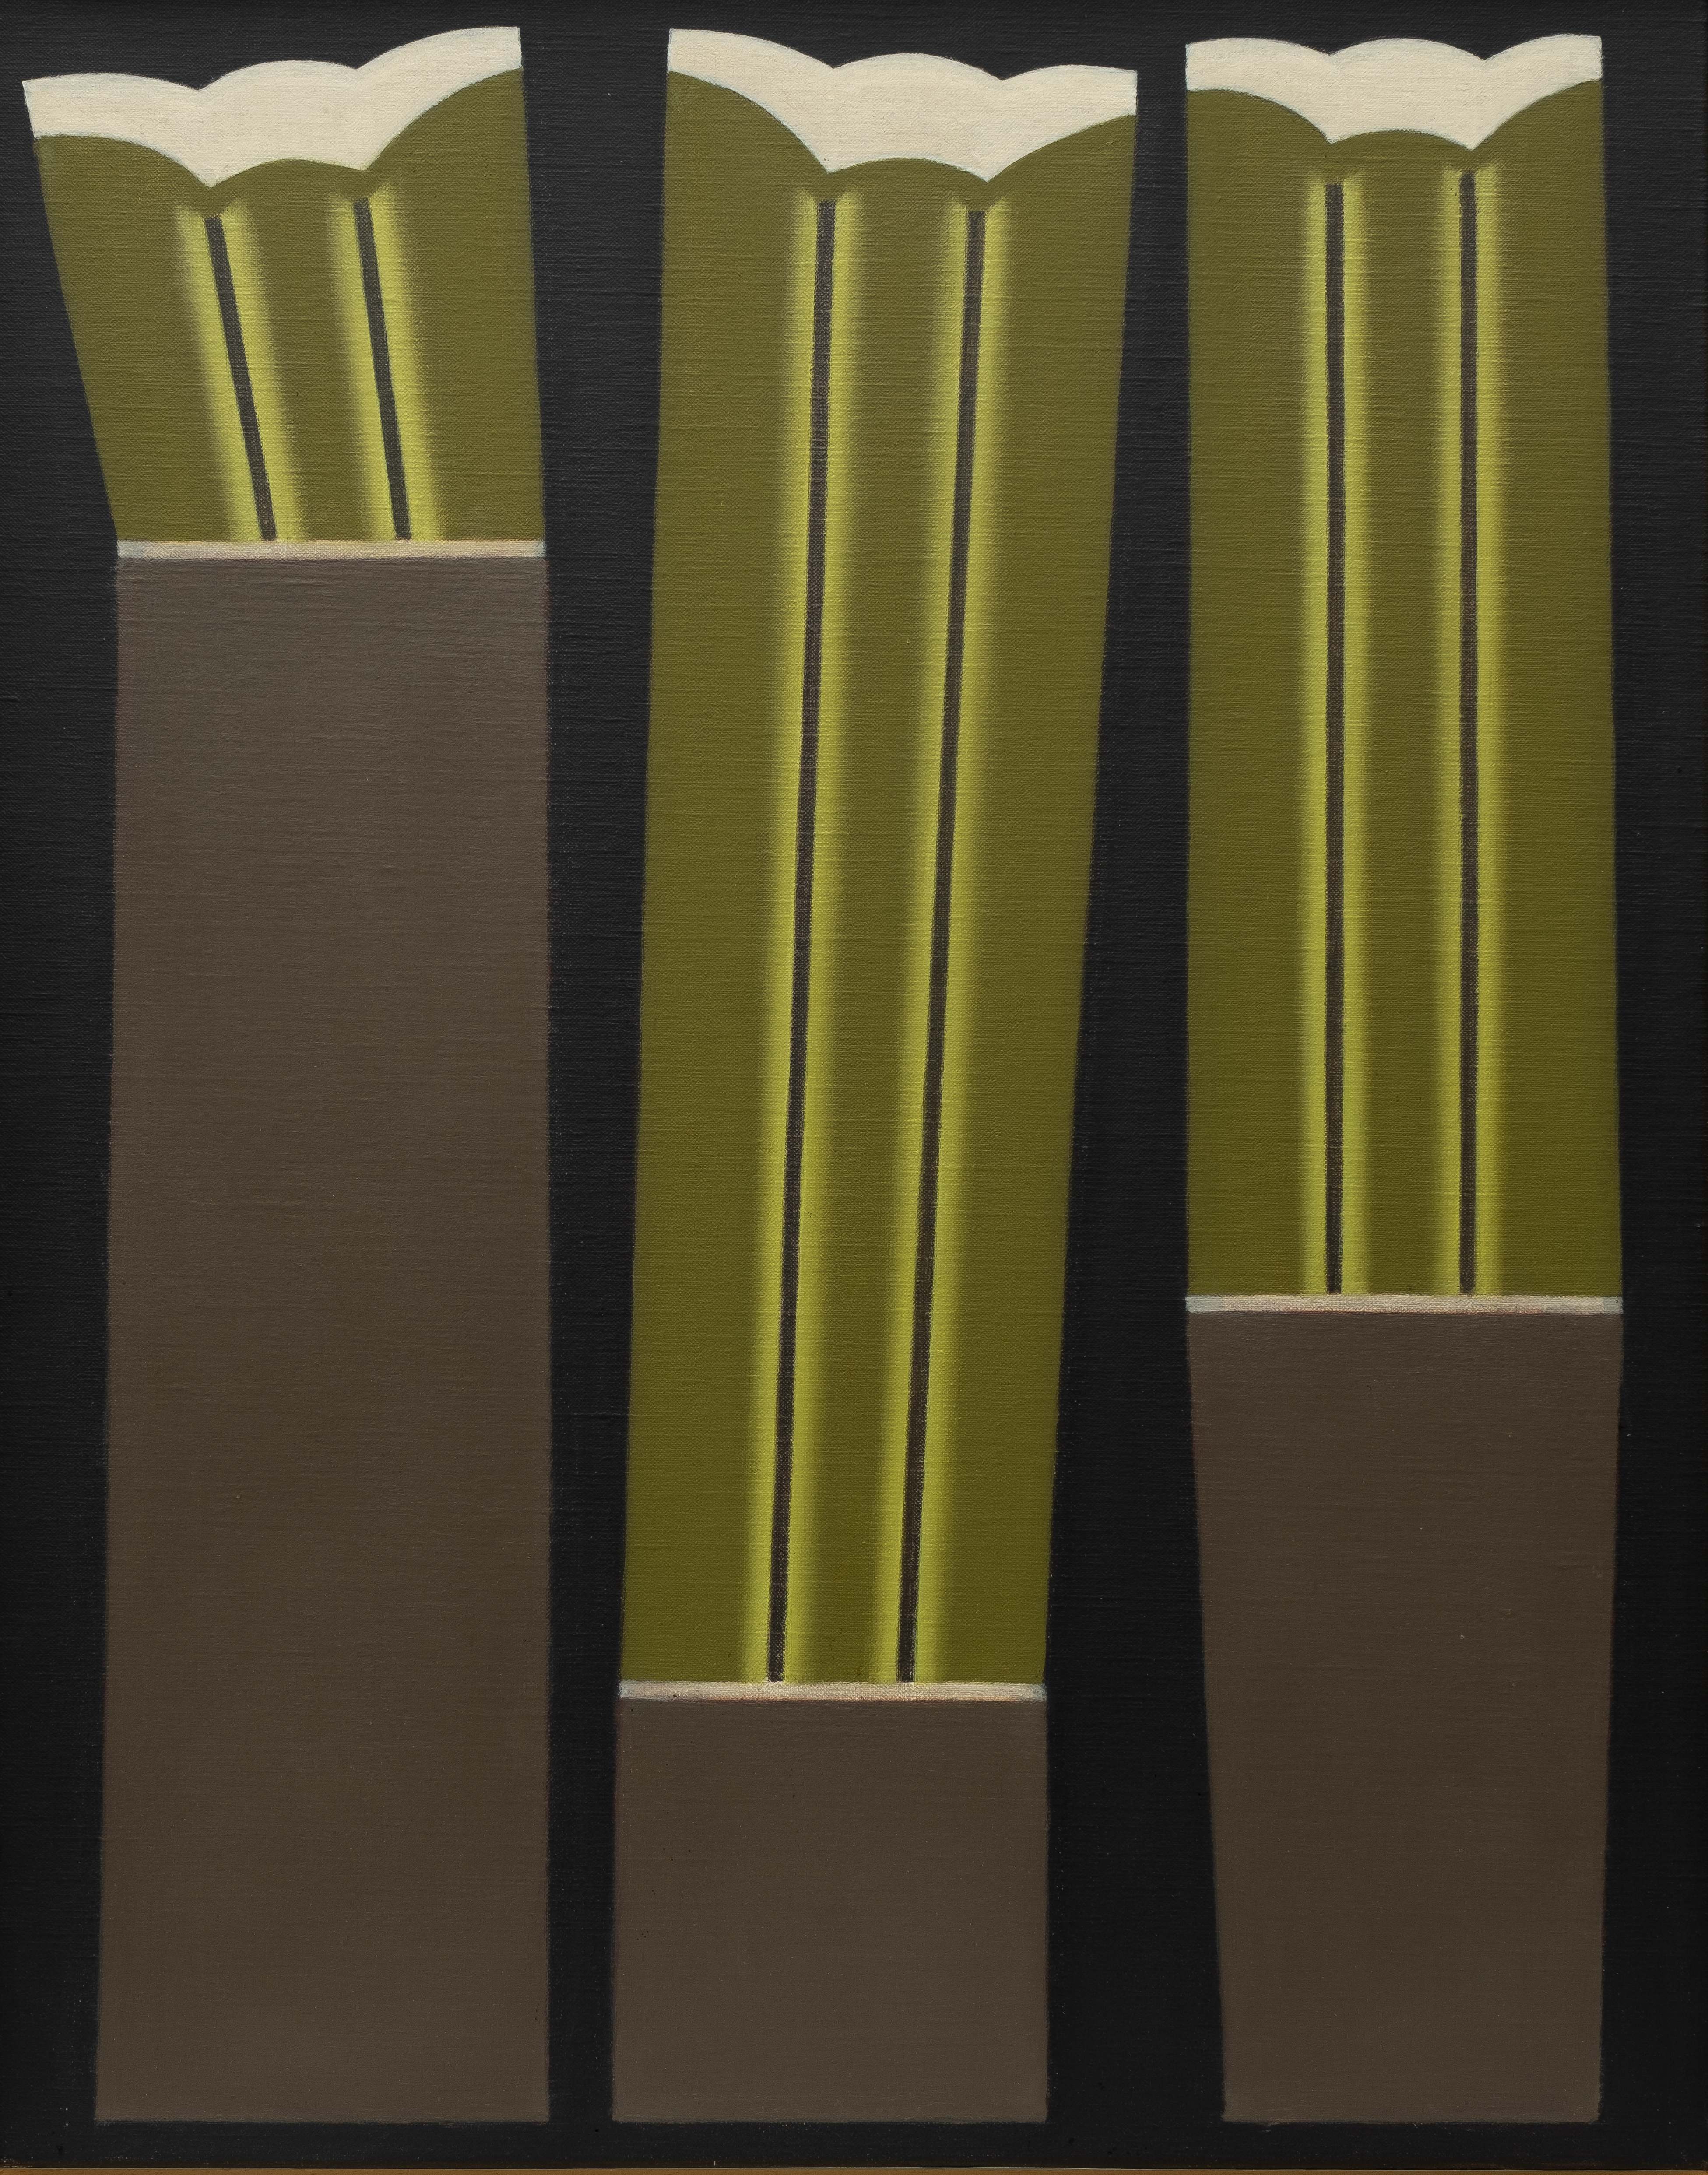 Untitled (Composition with three plants) (1996/1997)